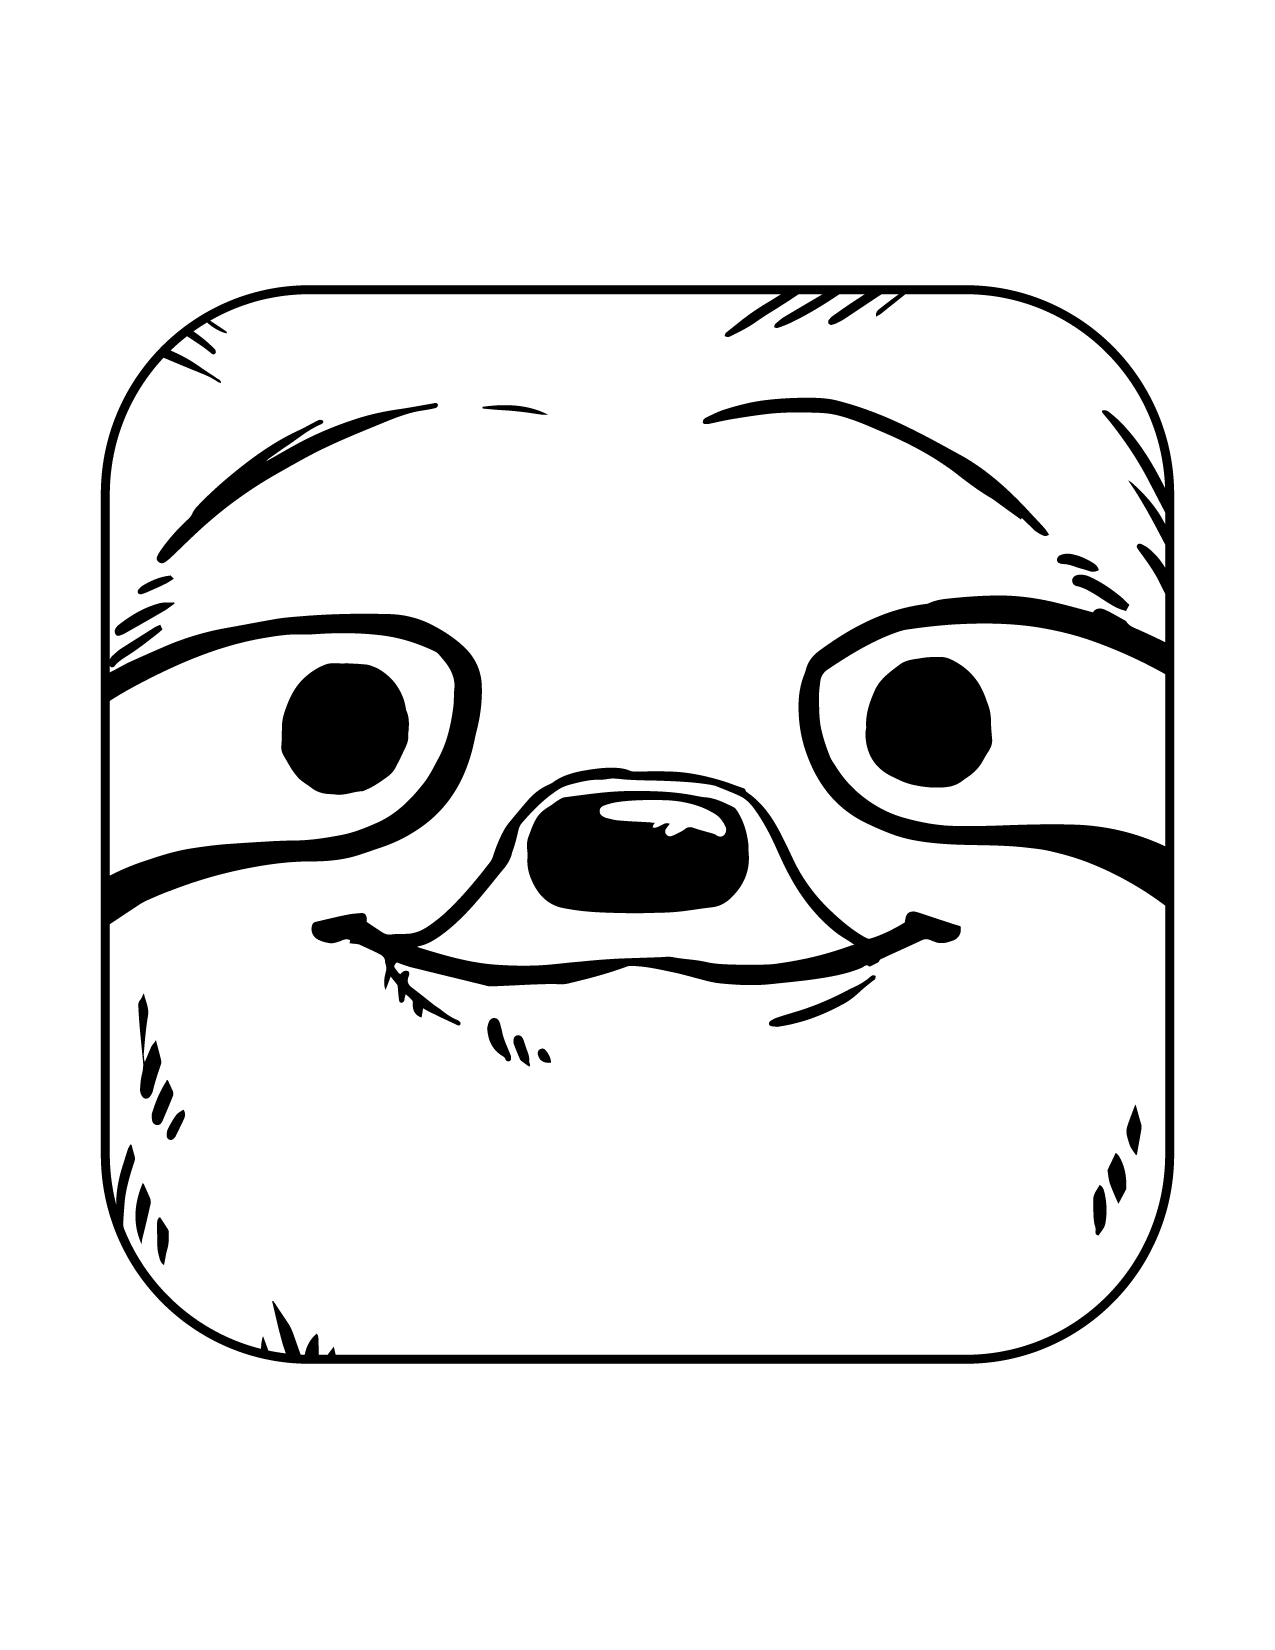 Sloth Face Coloring Page